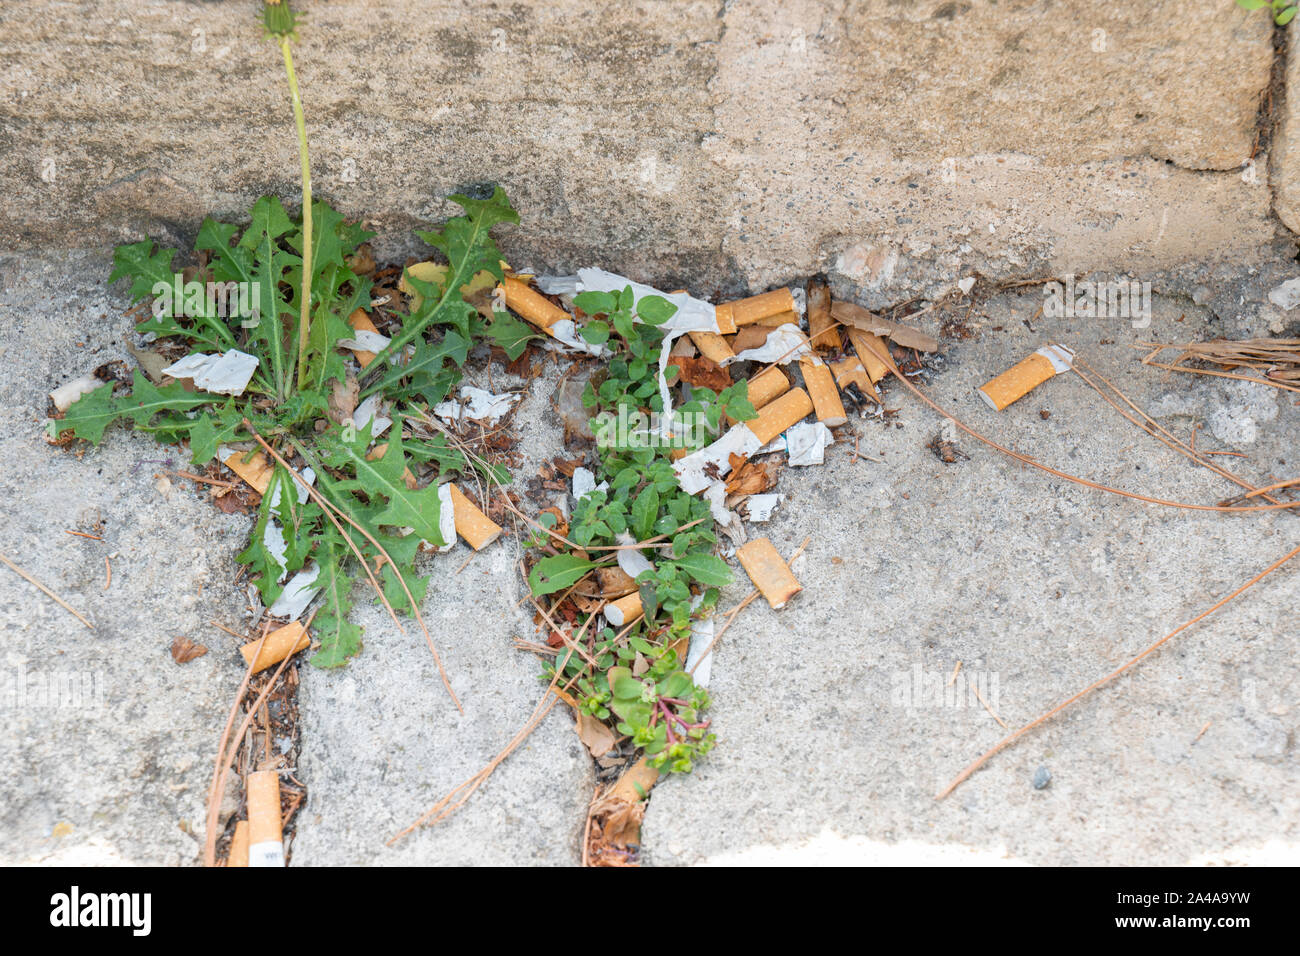 Smoking related litter on the streets of Bedoin, Provence, France. Stock Photo